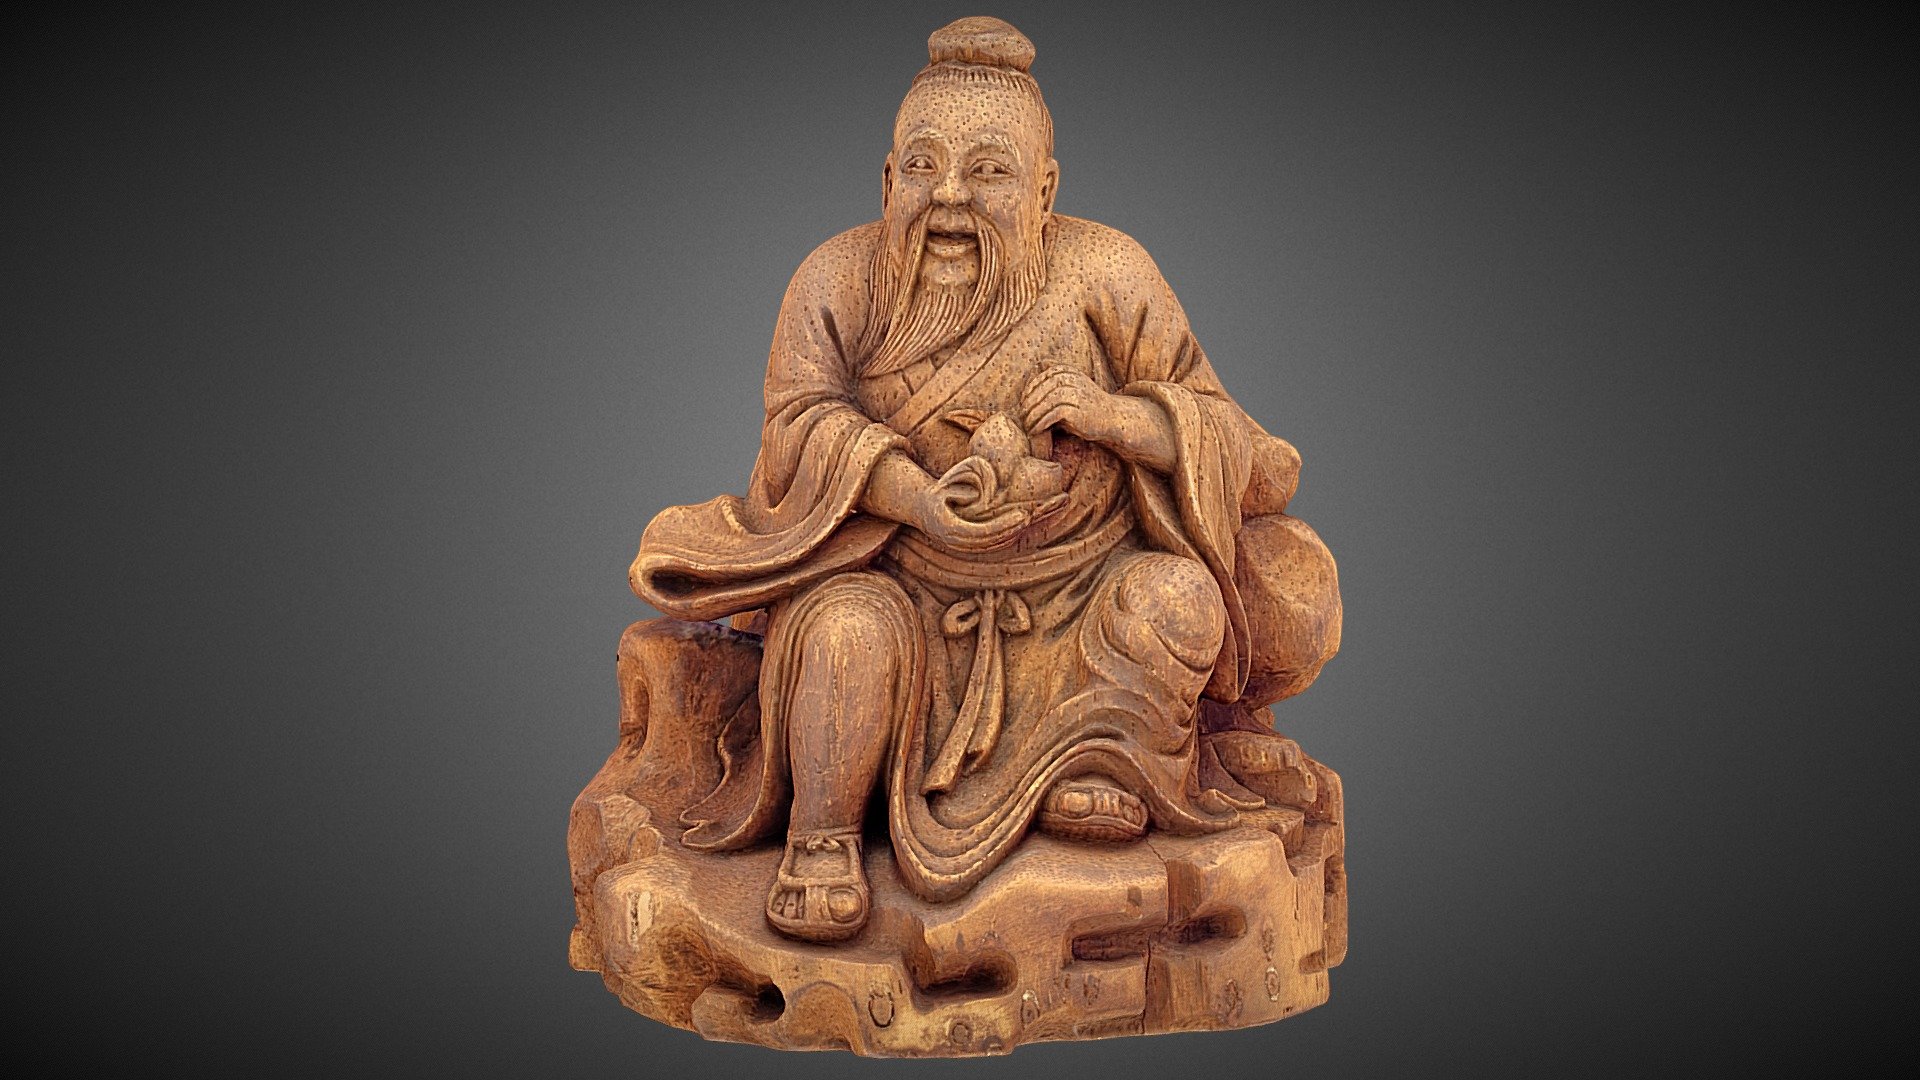 Antique wooden carving of a robed Chinese man sitting.
Version 2.0 - Master Edition. 

Created in RealityCapture by Capturing Reality from 2405 images in 08h:05m:18s 3d model